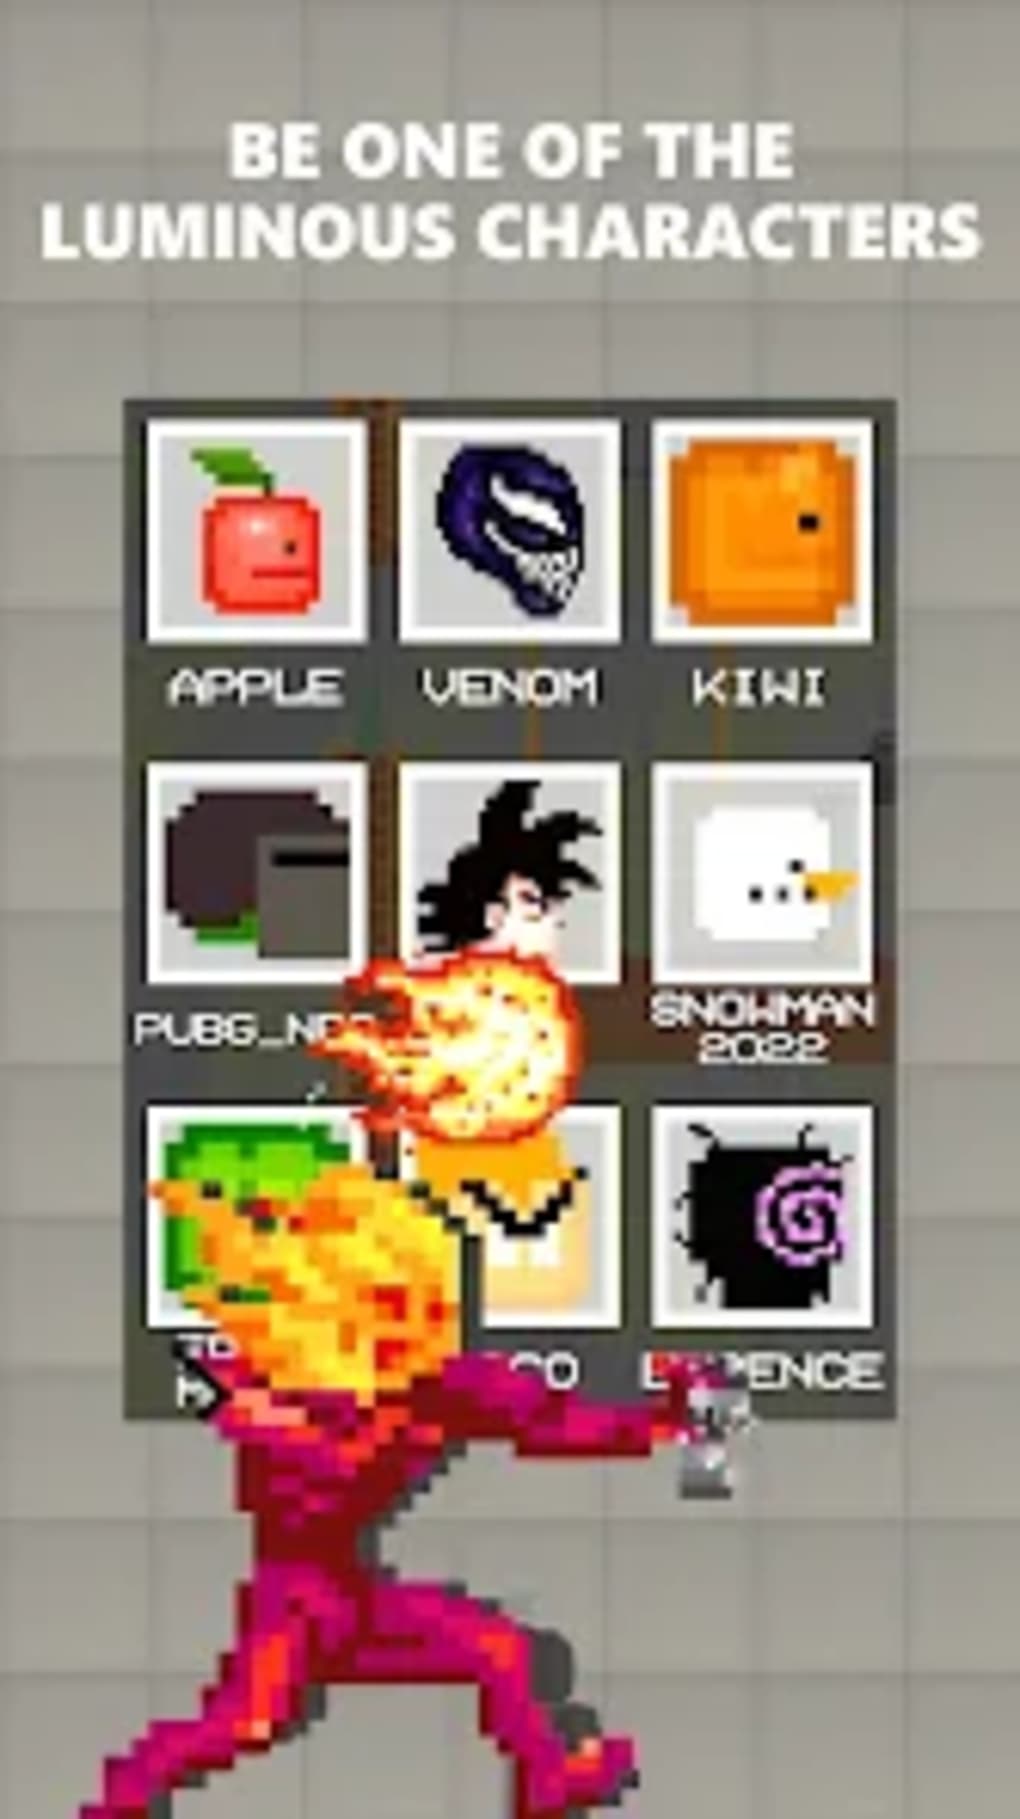 Mods Melon PlayGround for MCPE for Android - Download